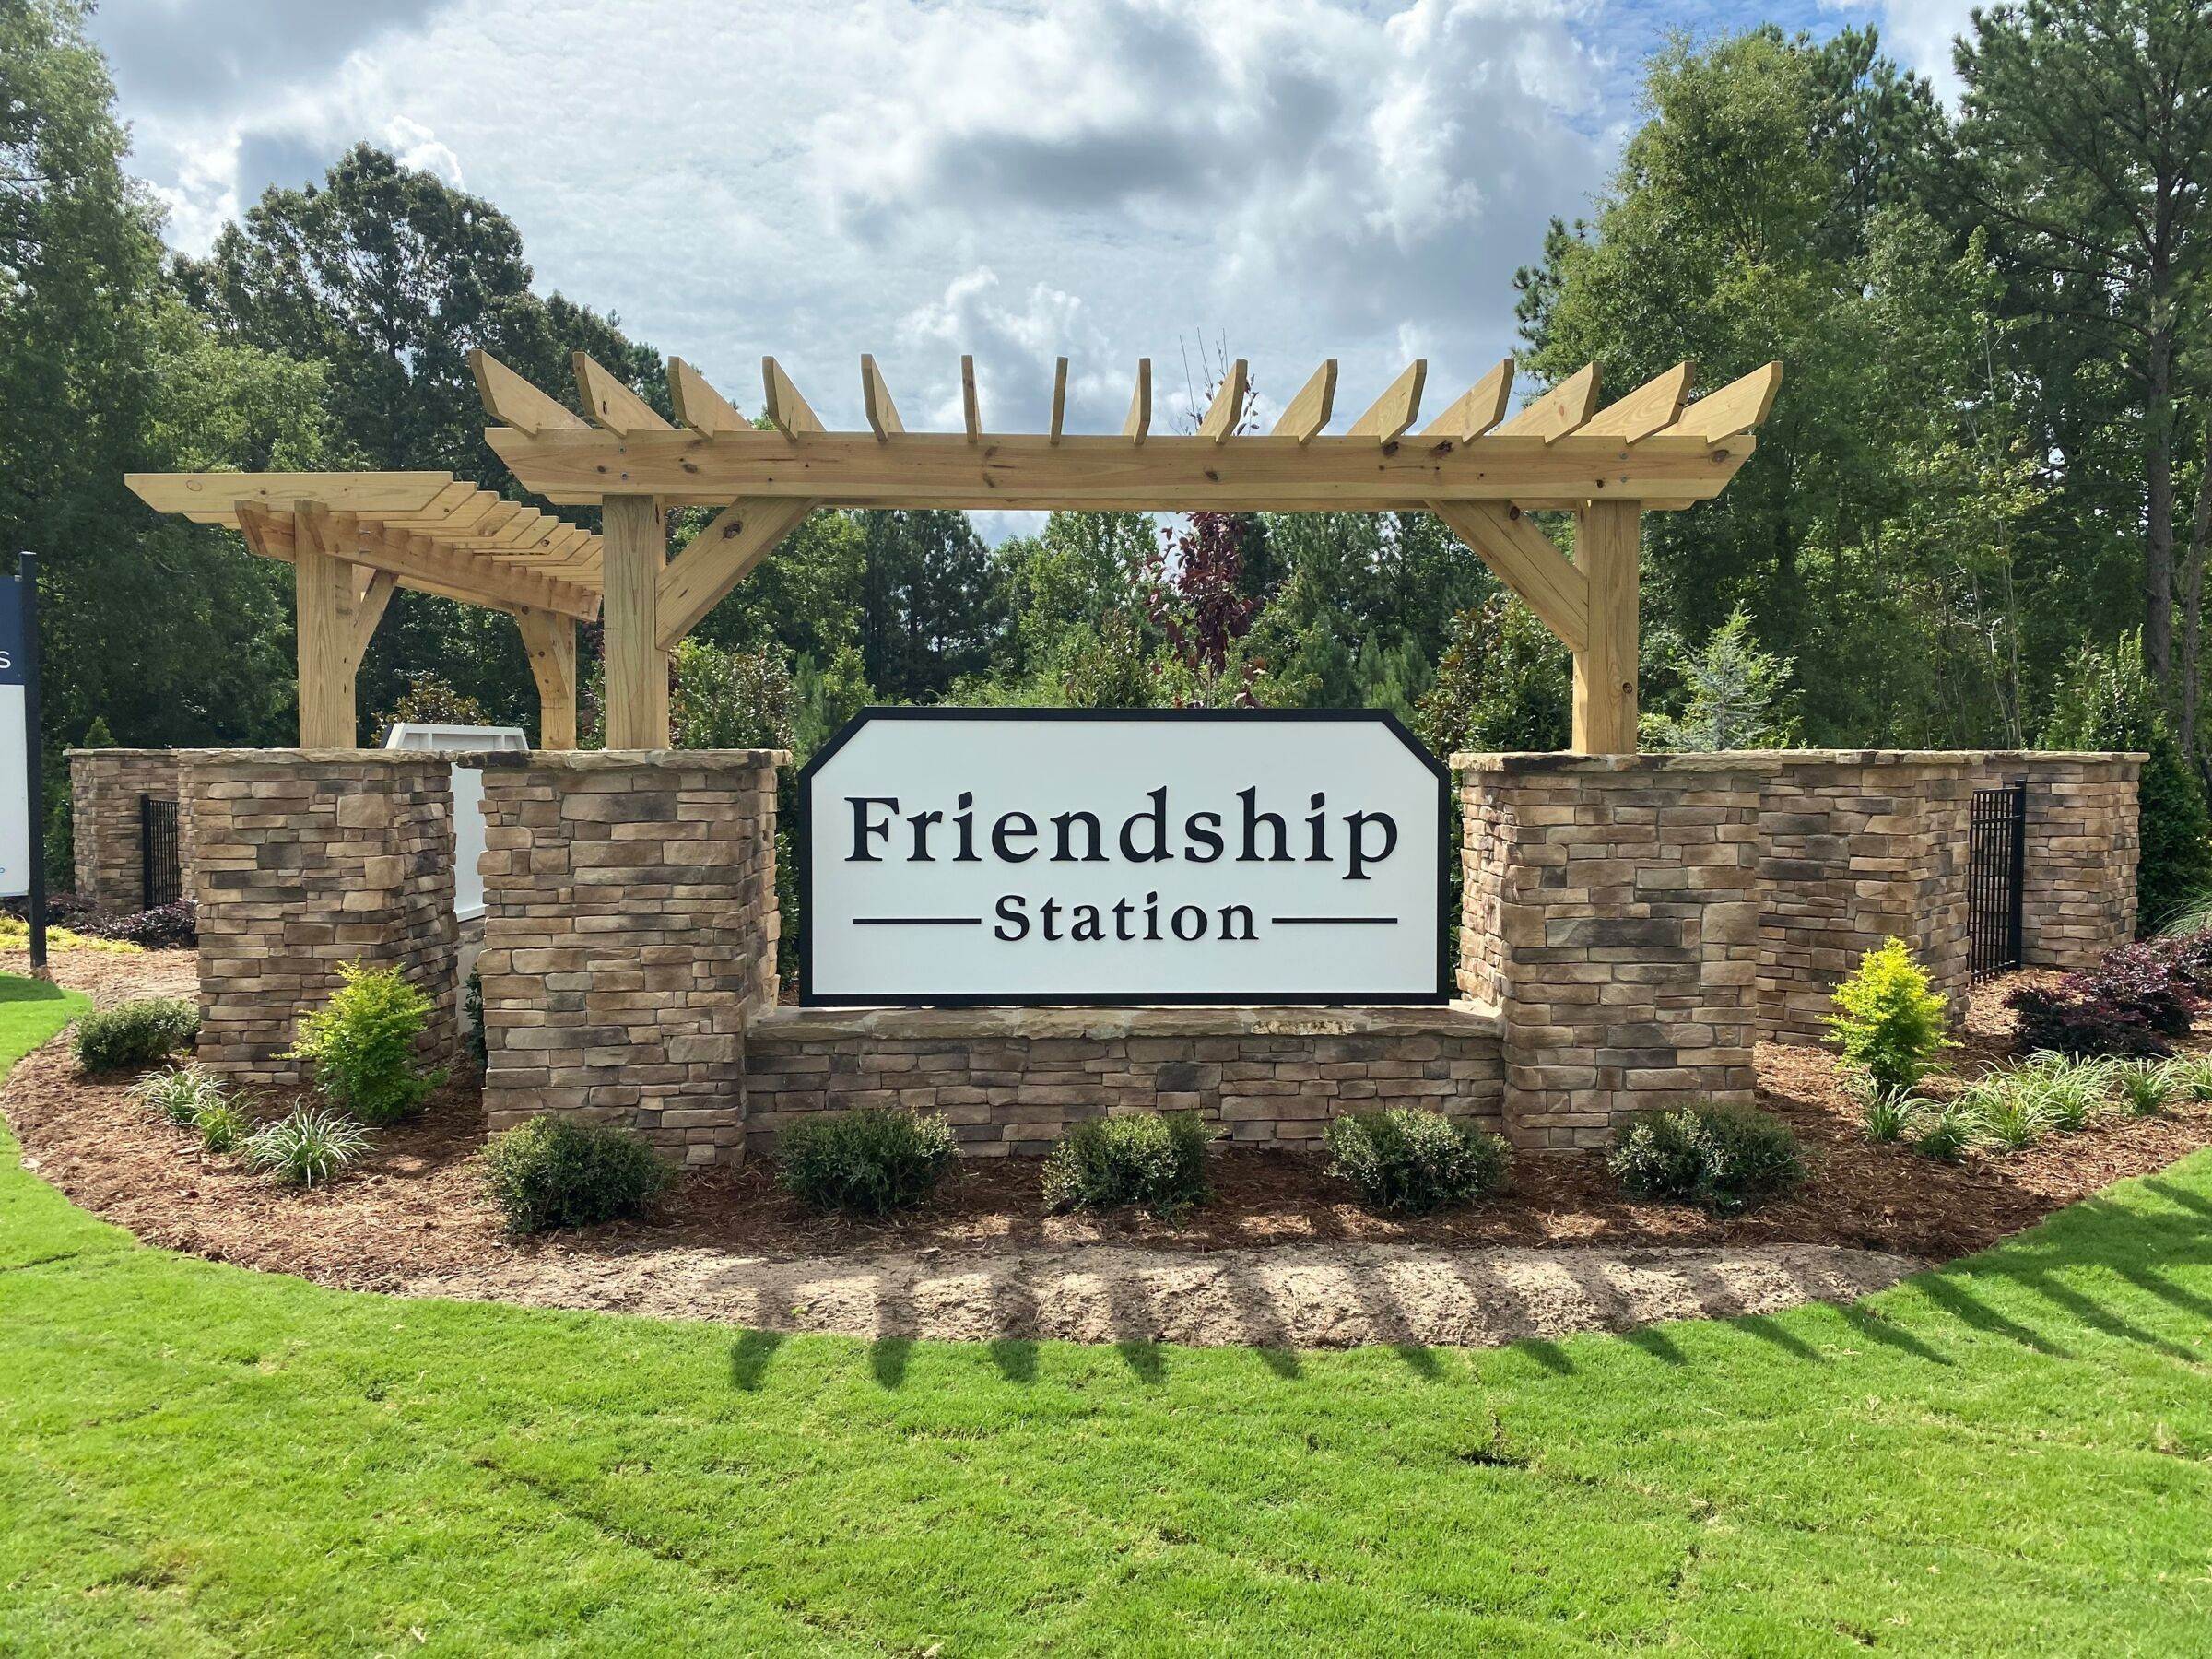 19. Friendship Station building at 2253 Kettle Falls Station, Apex, NC 27502